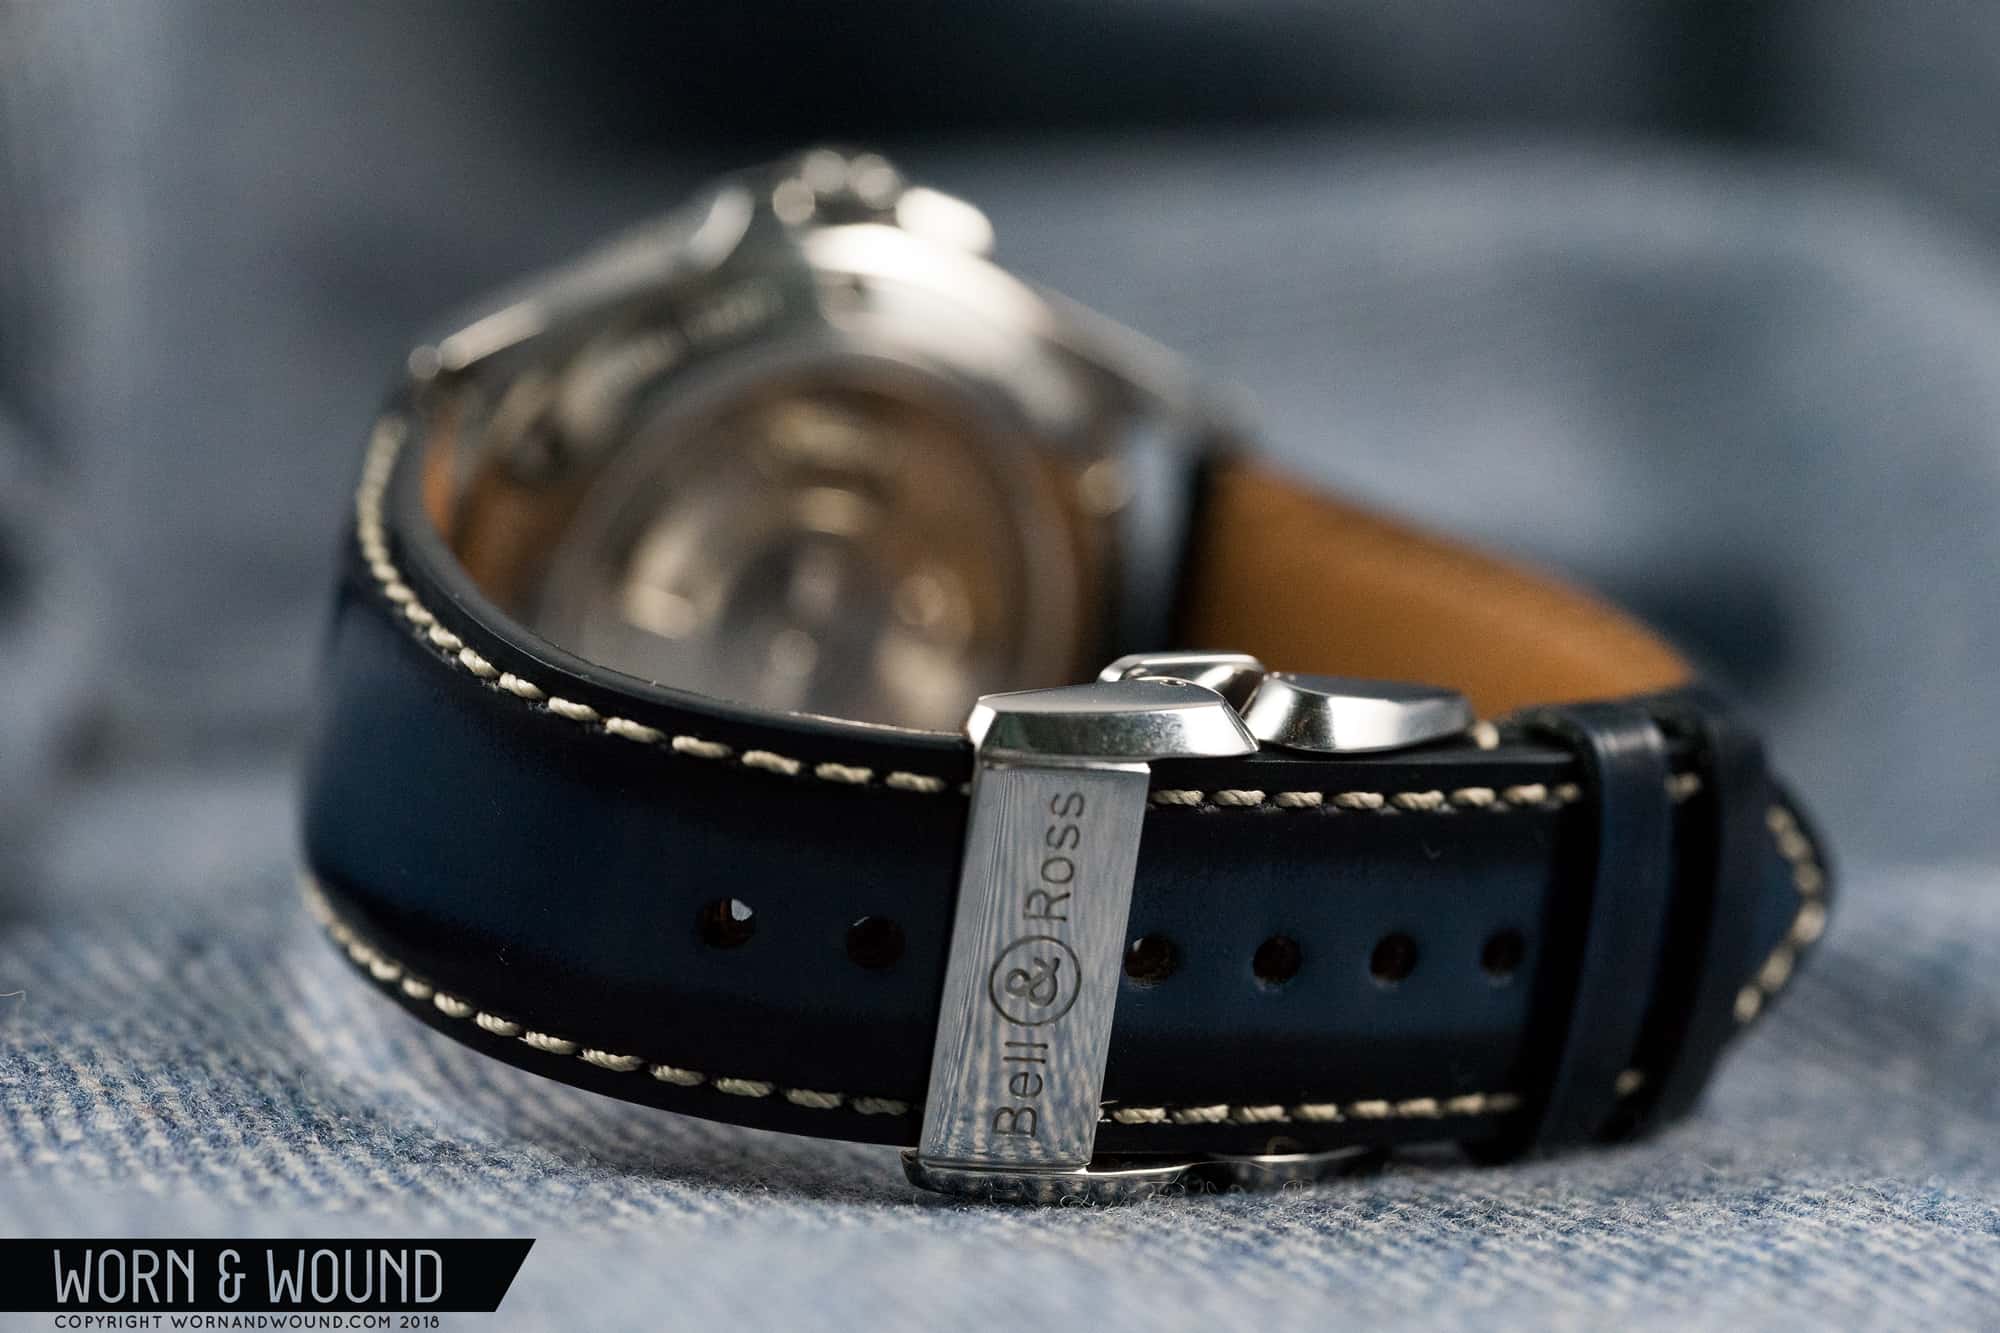 Review: Bell & Ross BR V2-92 Aeronavale - Worn & Wound